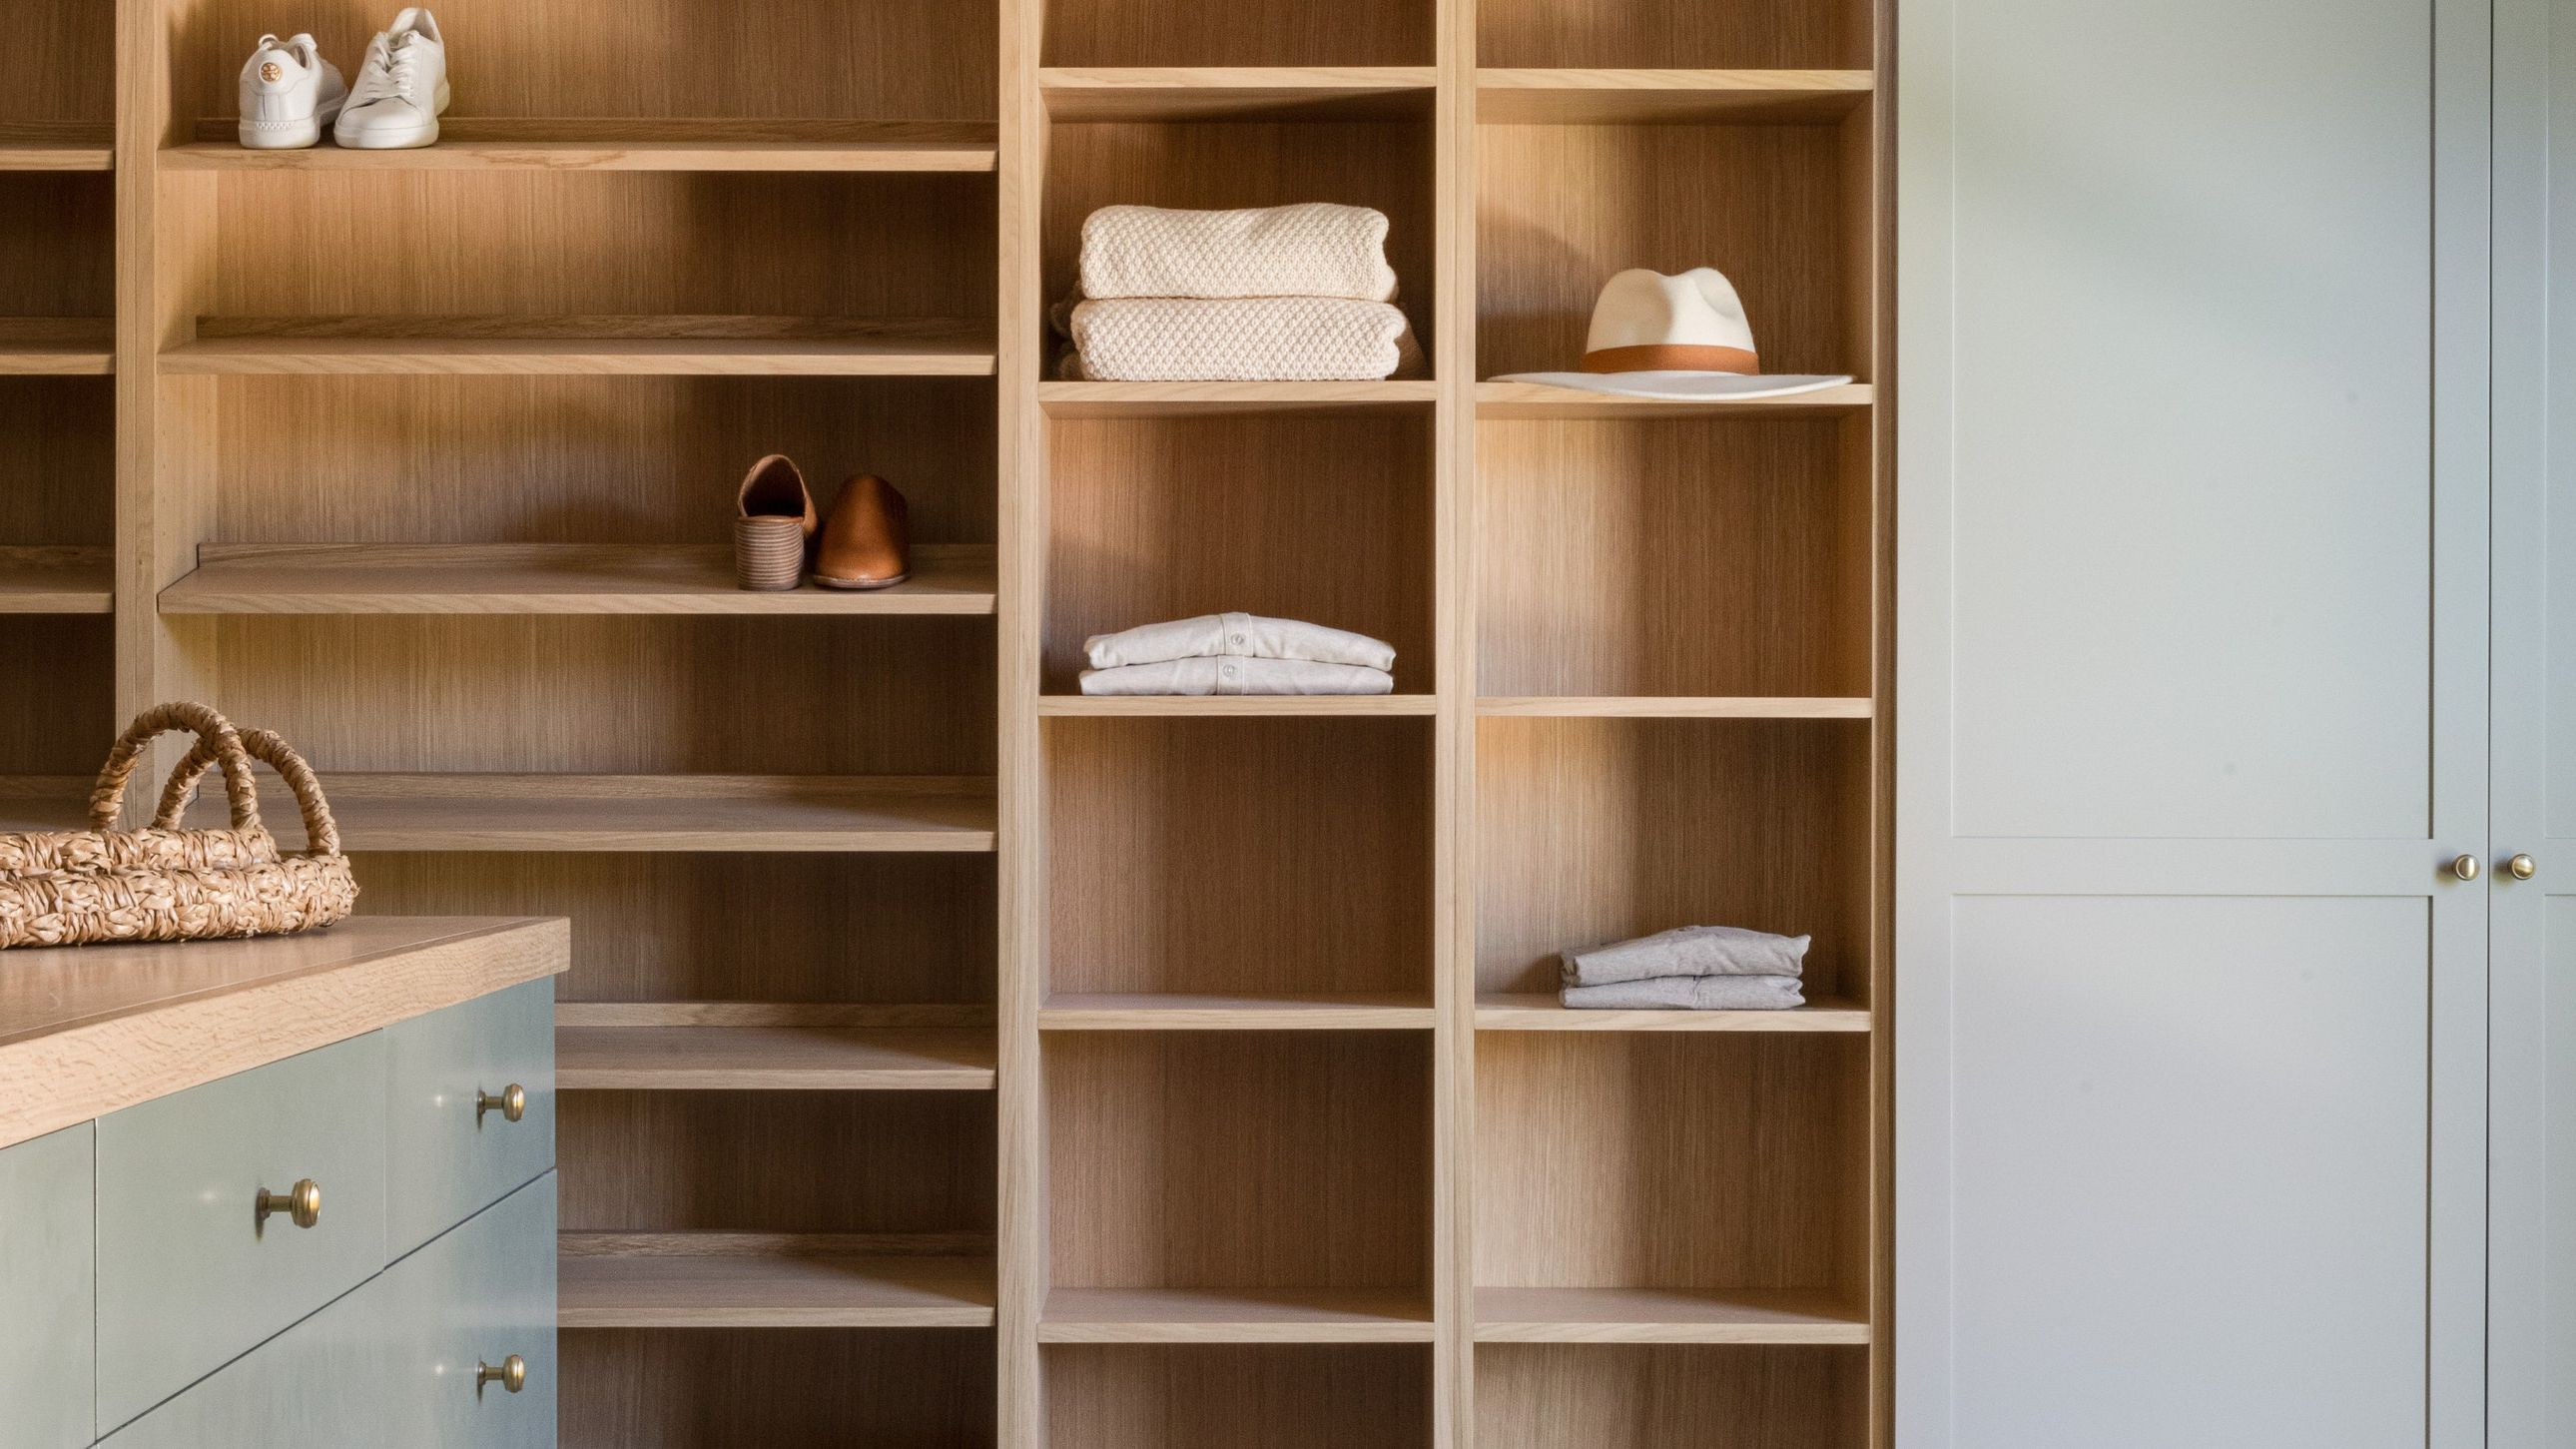 33 Best Closet Organization Ideas To Maximize Space And Style |  Architectural Digest | Architectural Digest Within Double Wardrobes With Drawers And Shelves (View 12 of 20)